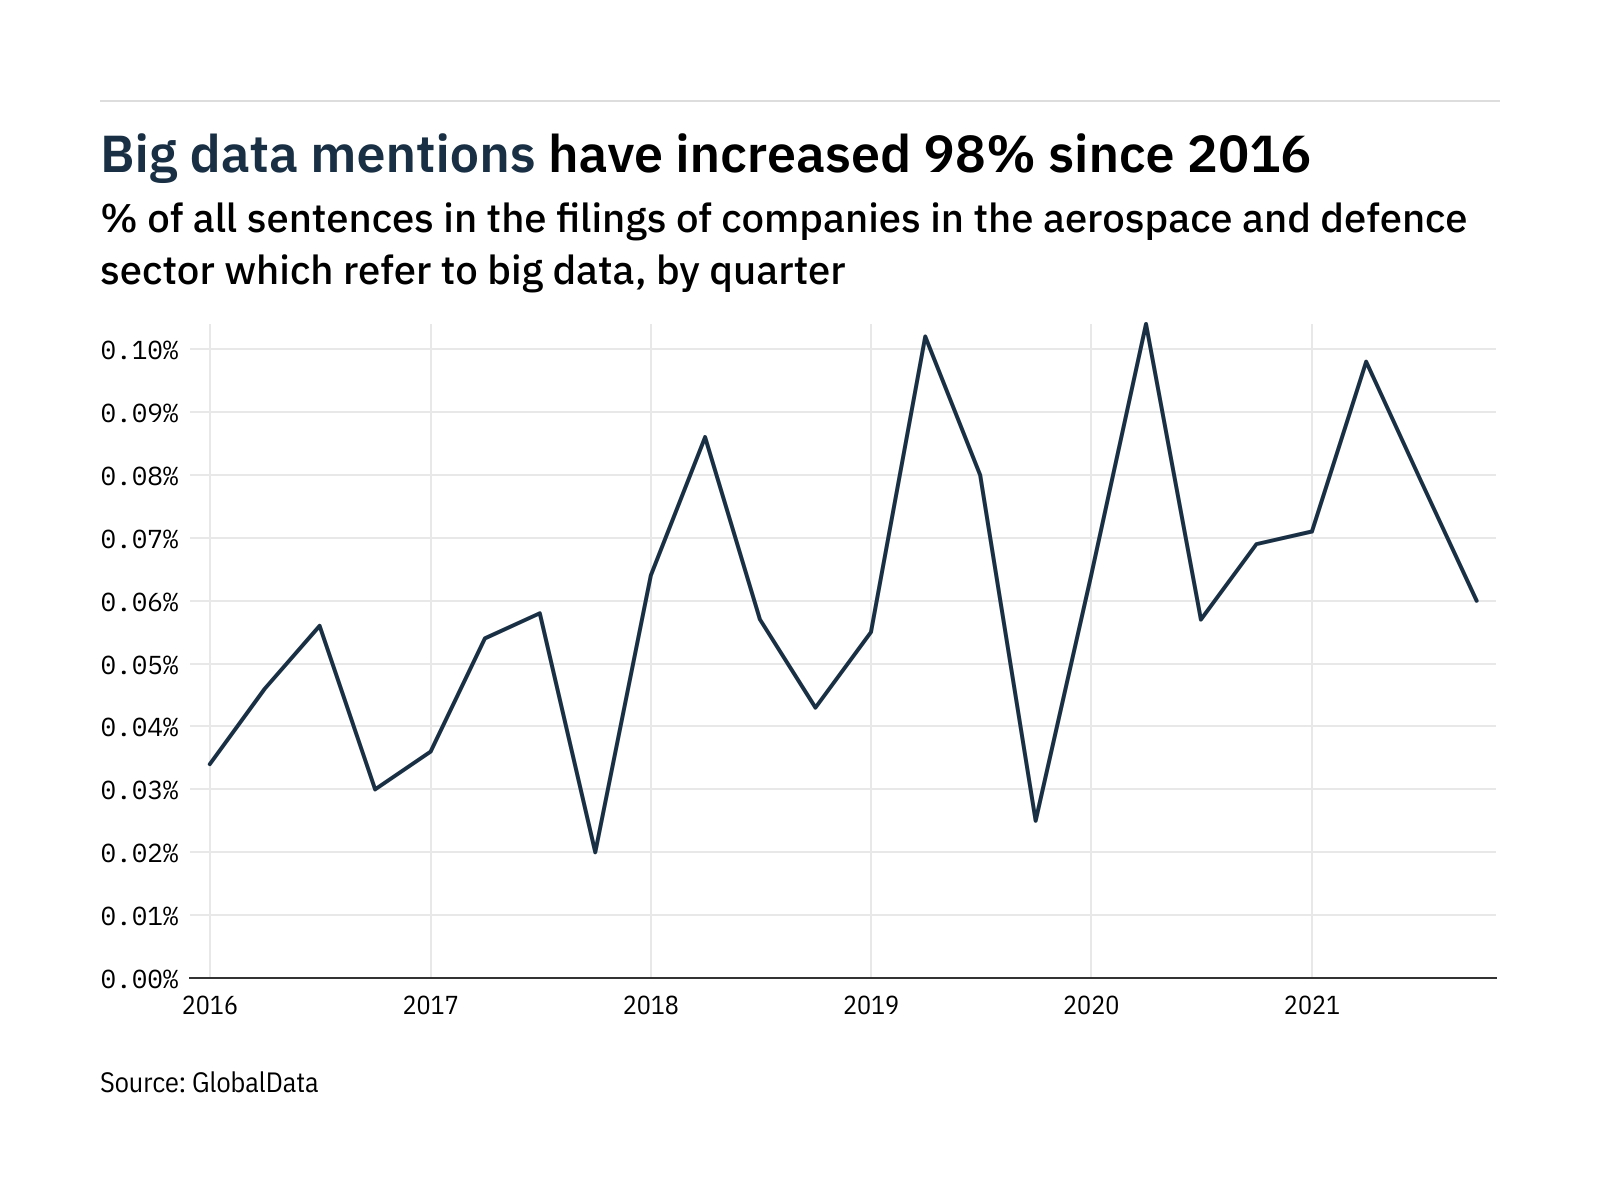 Filings buzz in the aerospace and defence sector: 24% decrease in big data mentions in Q4 of 2021